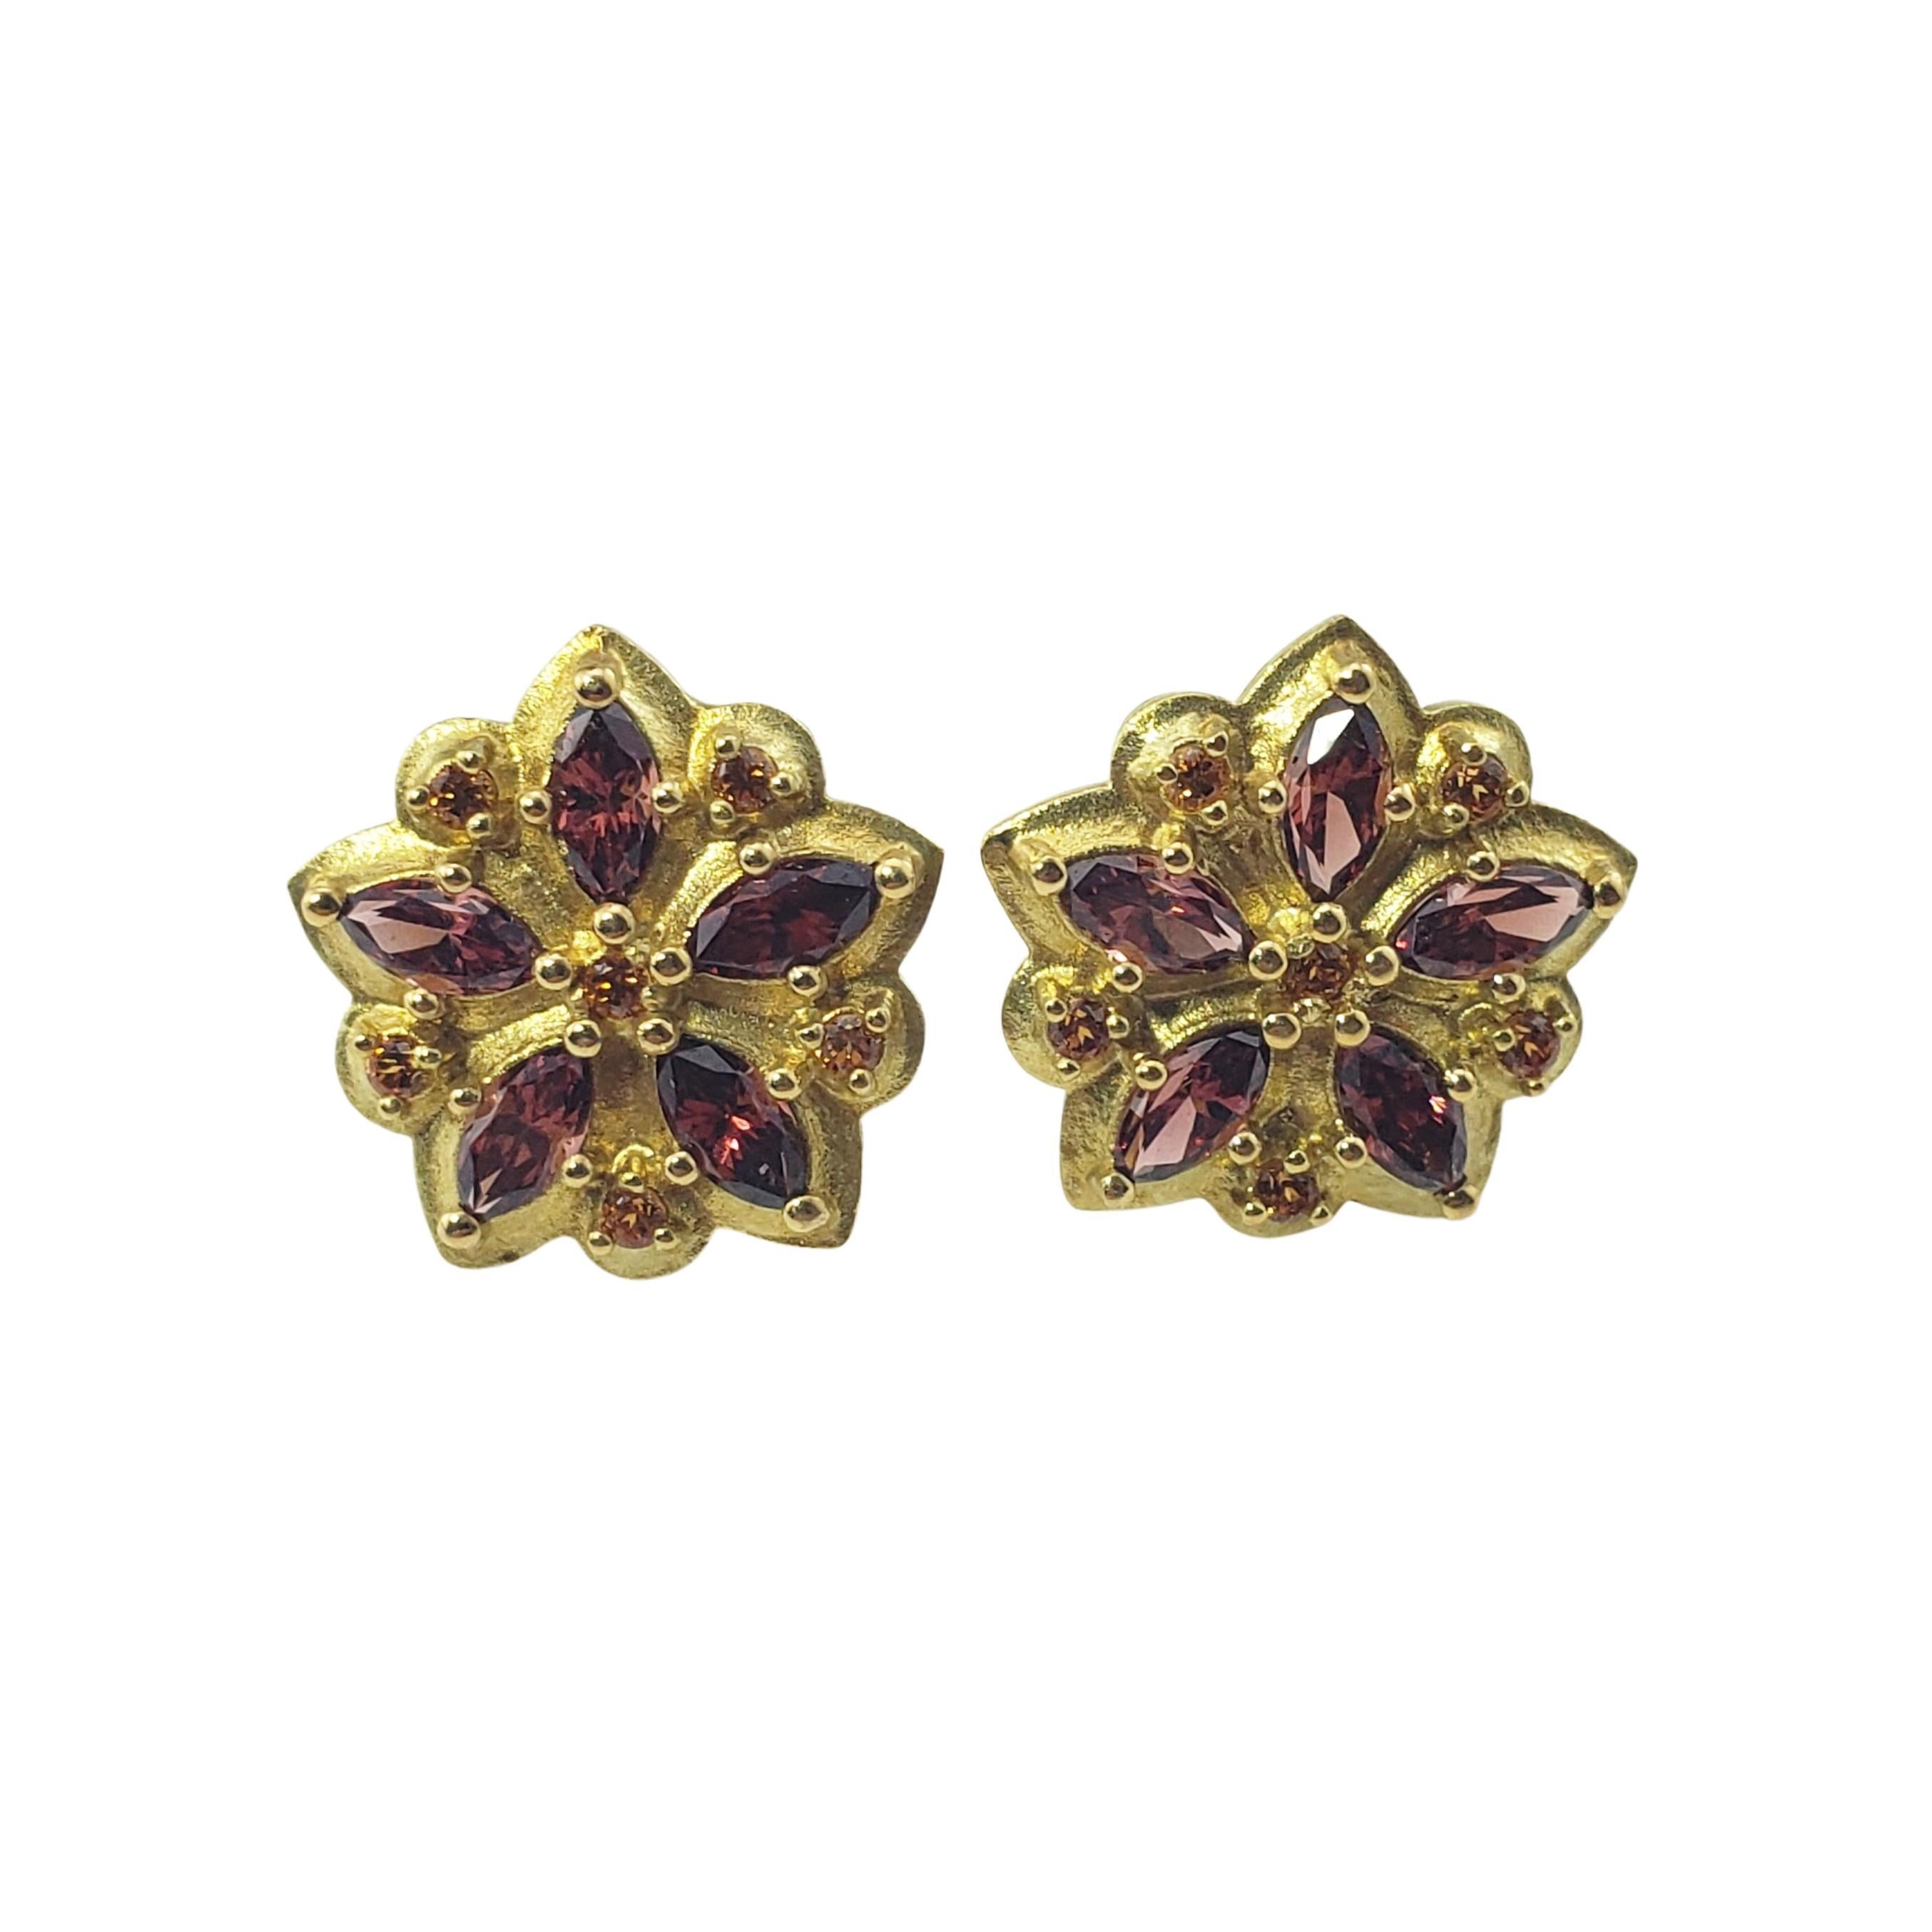 Paul Morelli 18 Karat Yellow Gold Garnet and Citrine Flower Earrings-

These stunning flower earrings by New York jewelry designer Paul Morelli each feature five marquis garnets (6 mm x 3 mm each) and five citrine gemstones set in beautifully